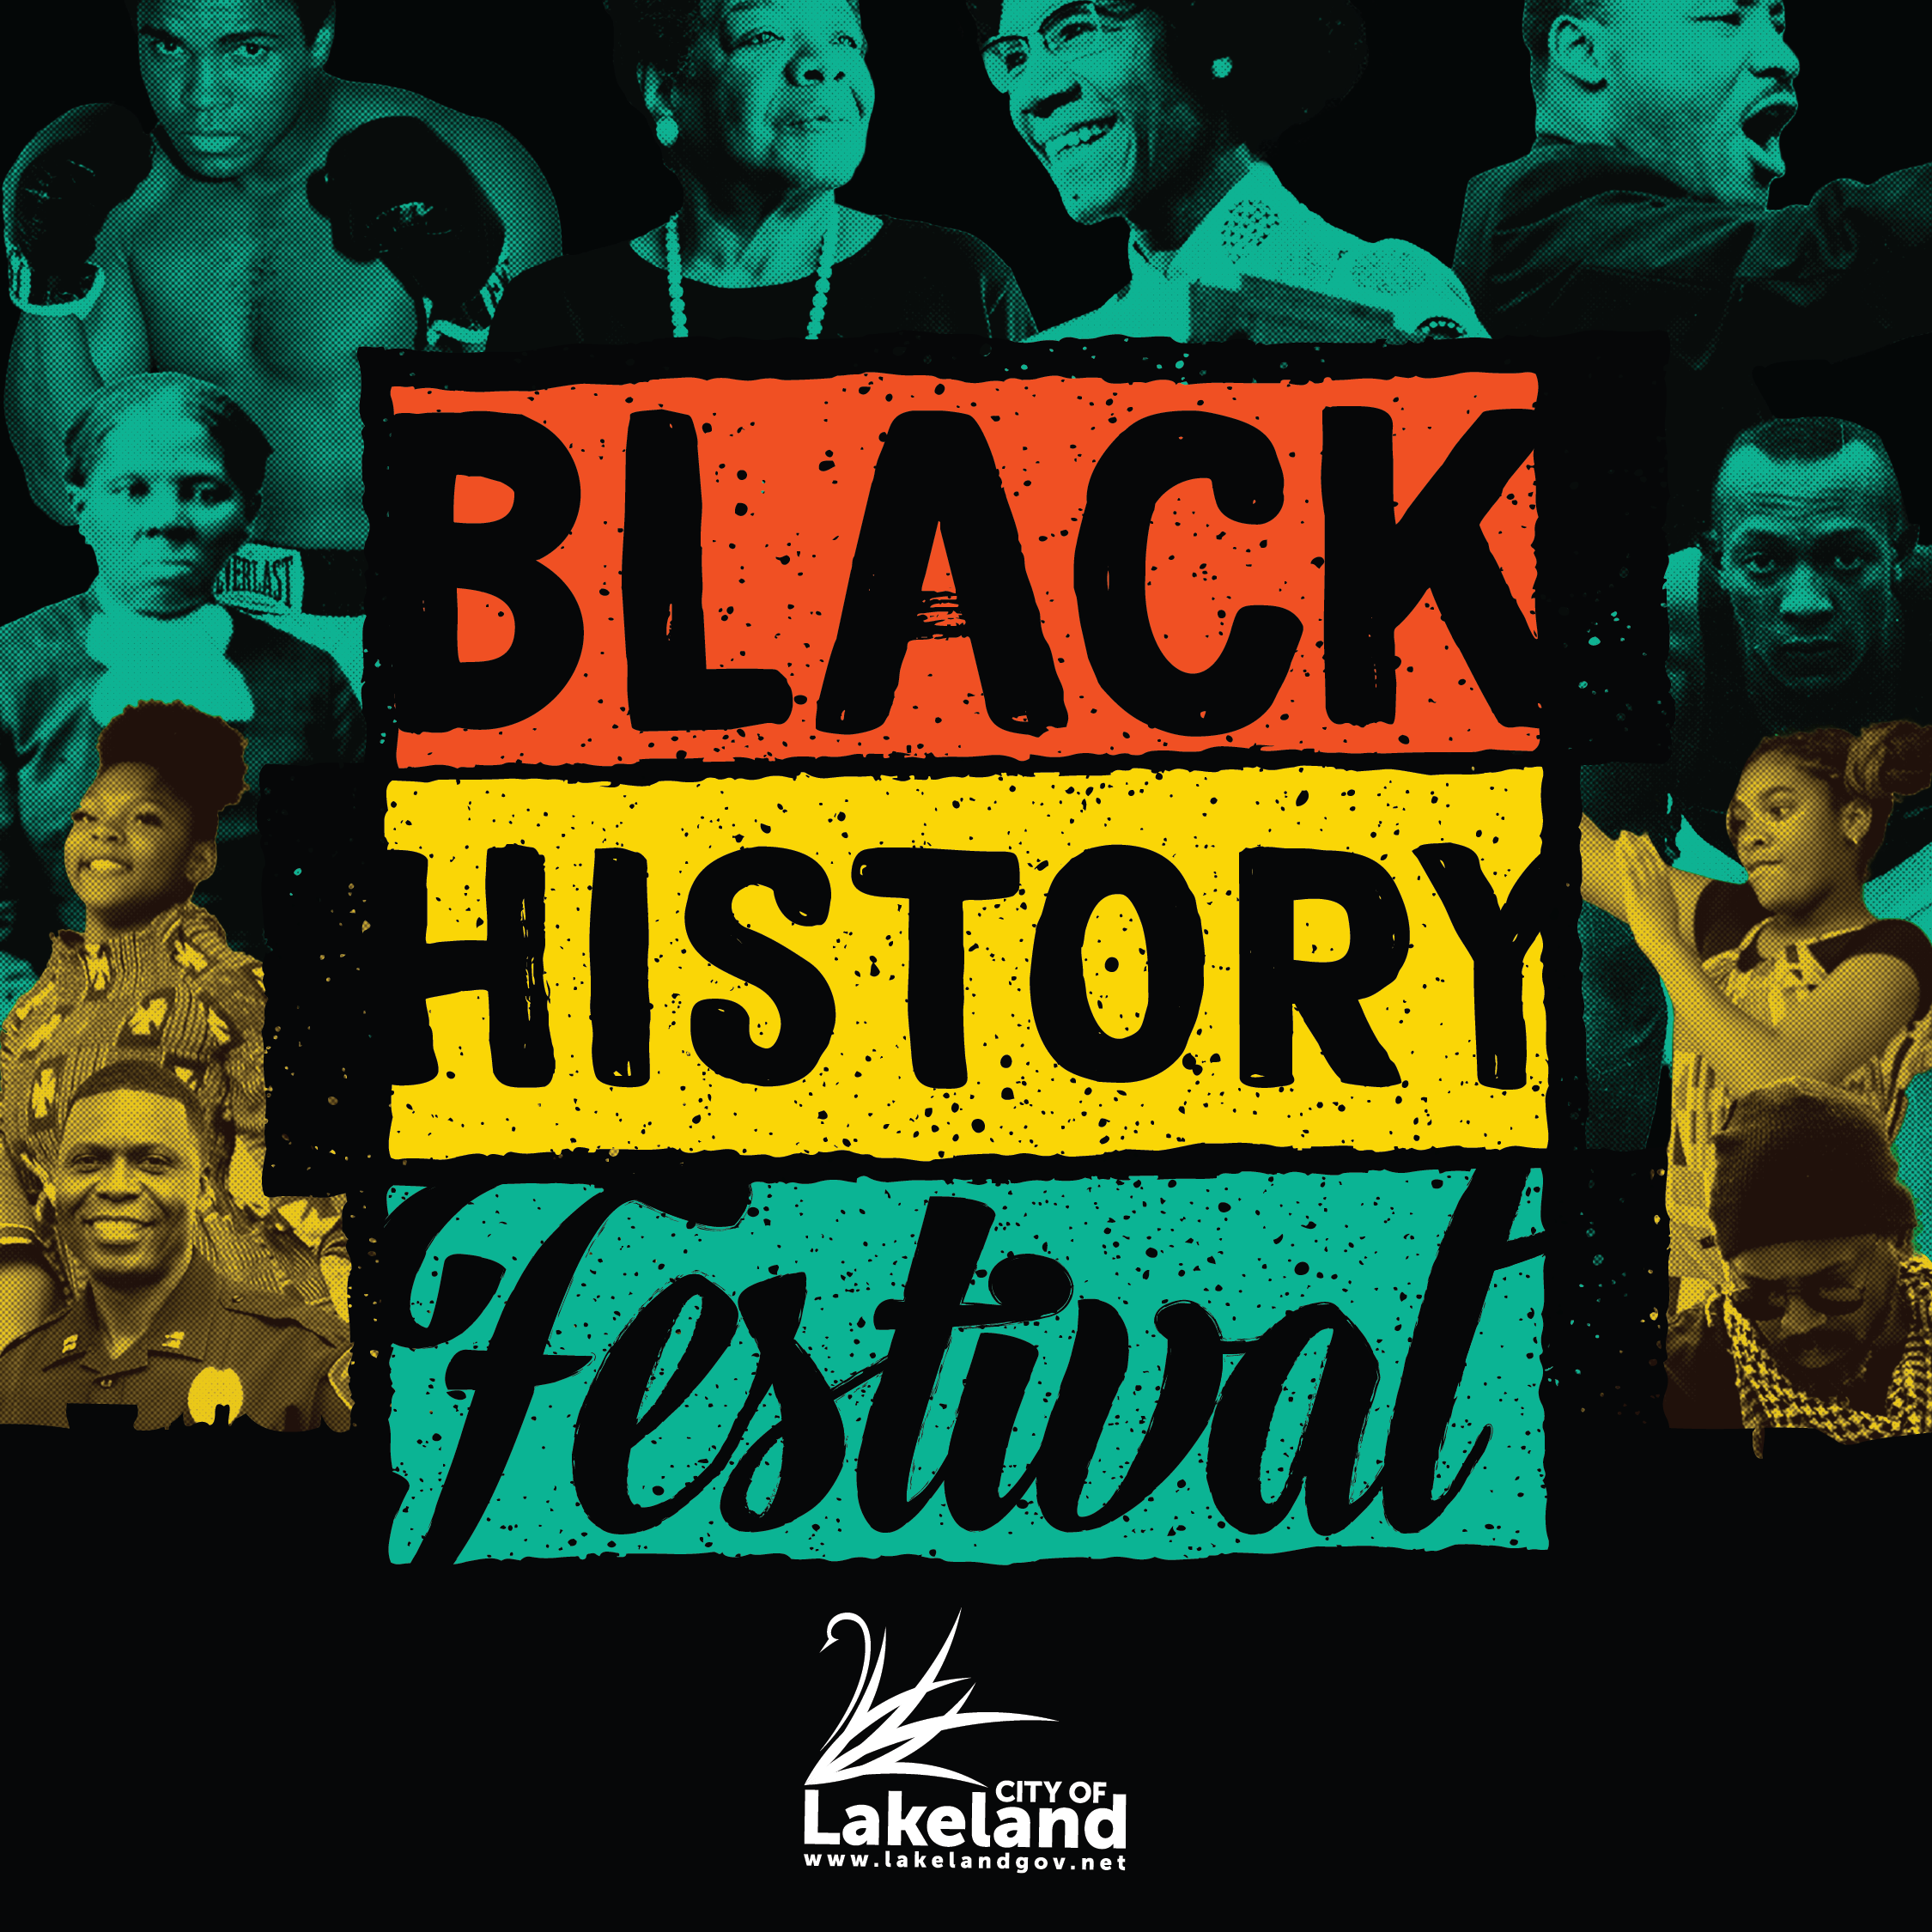 Black History Festival - with decorative elements along the outside and the city of lakeland logo at the bottom.